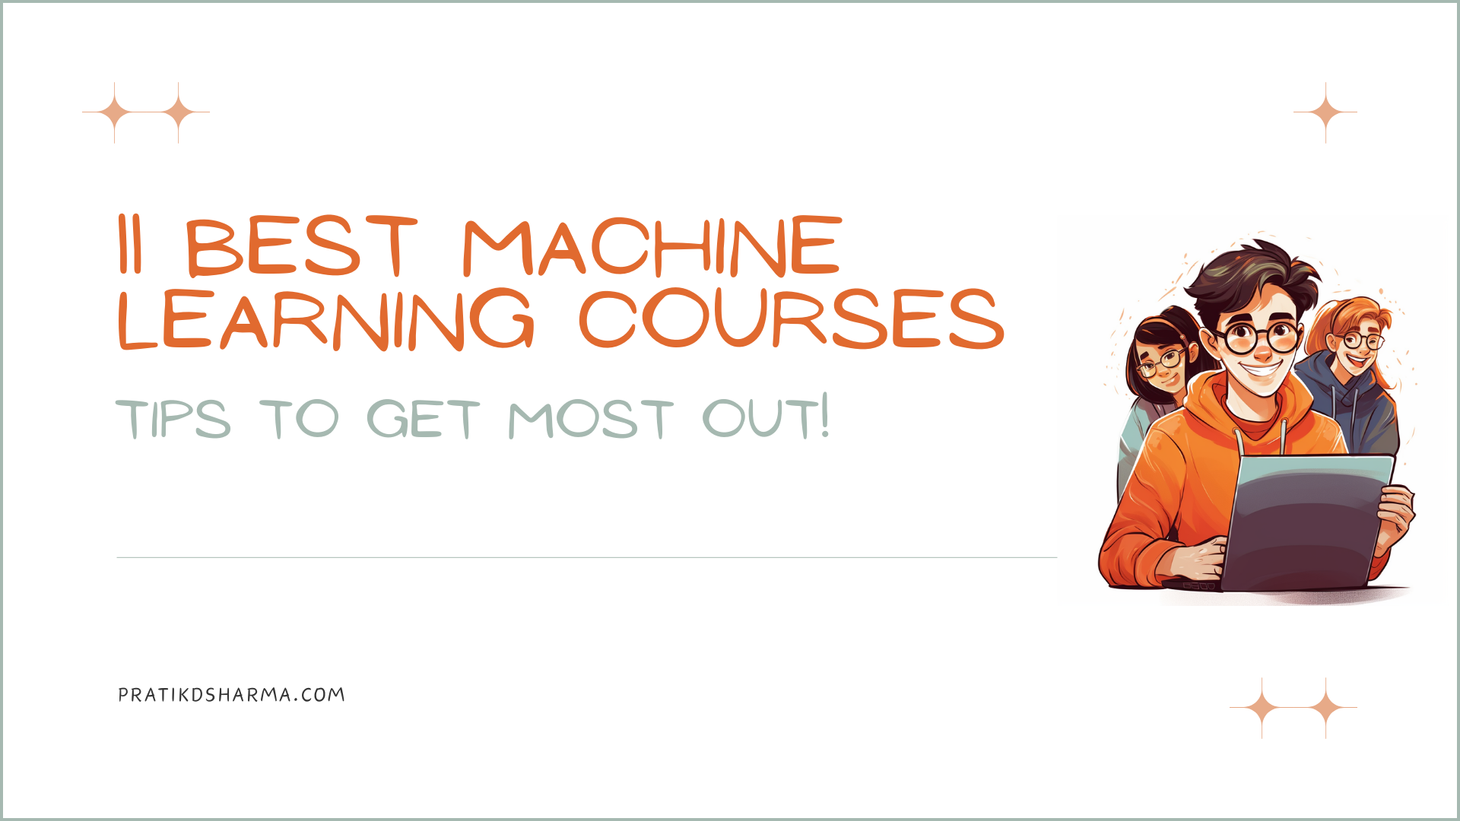 11 Best Machine Learning Courses.